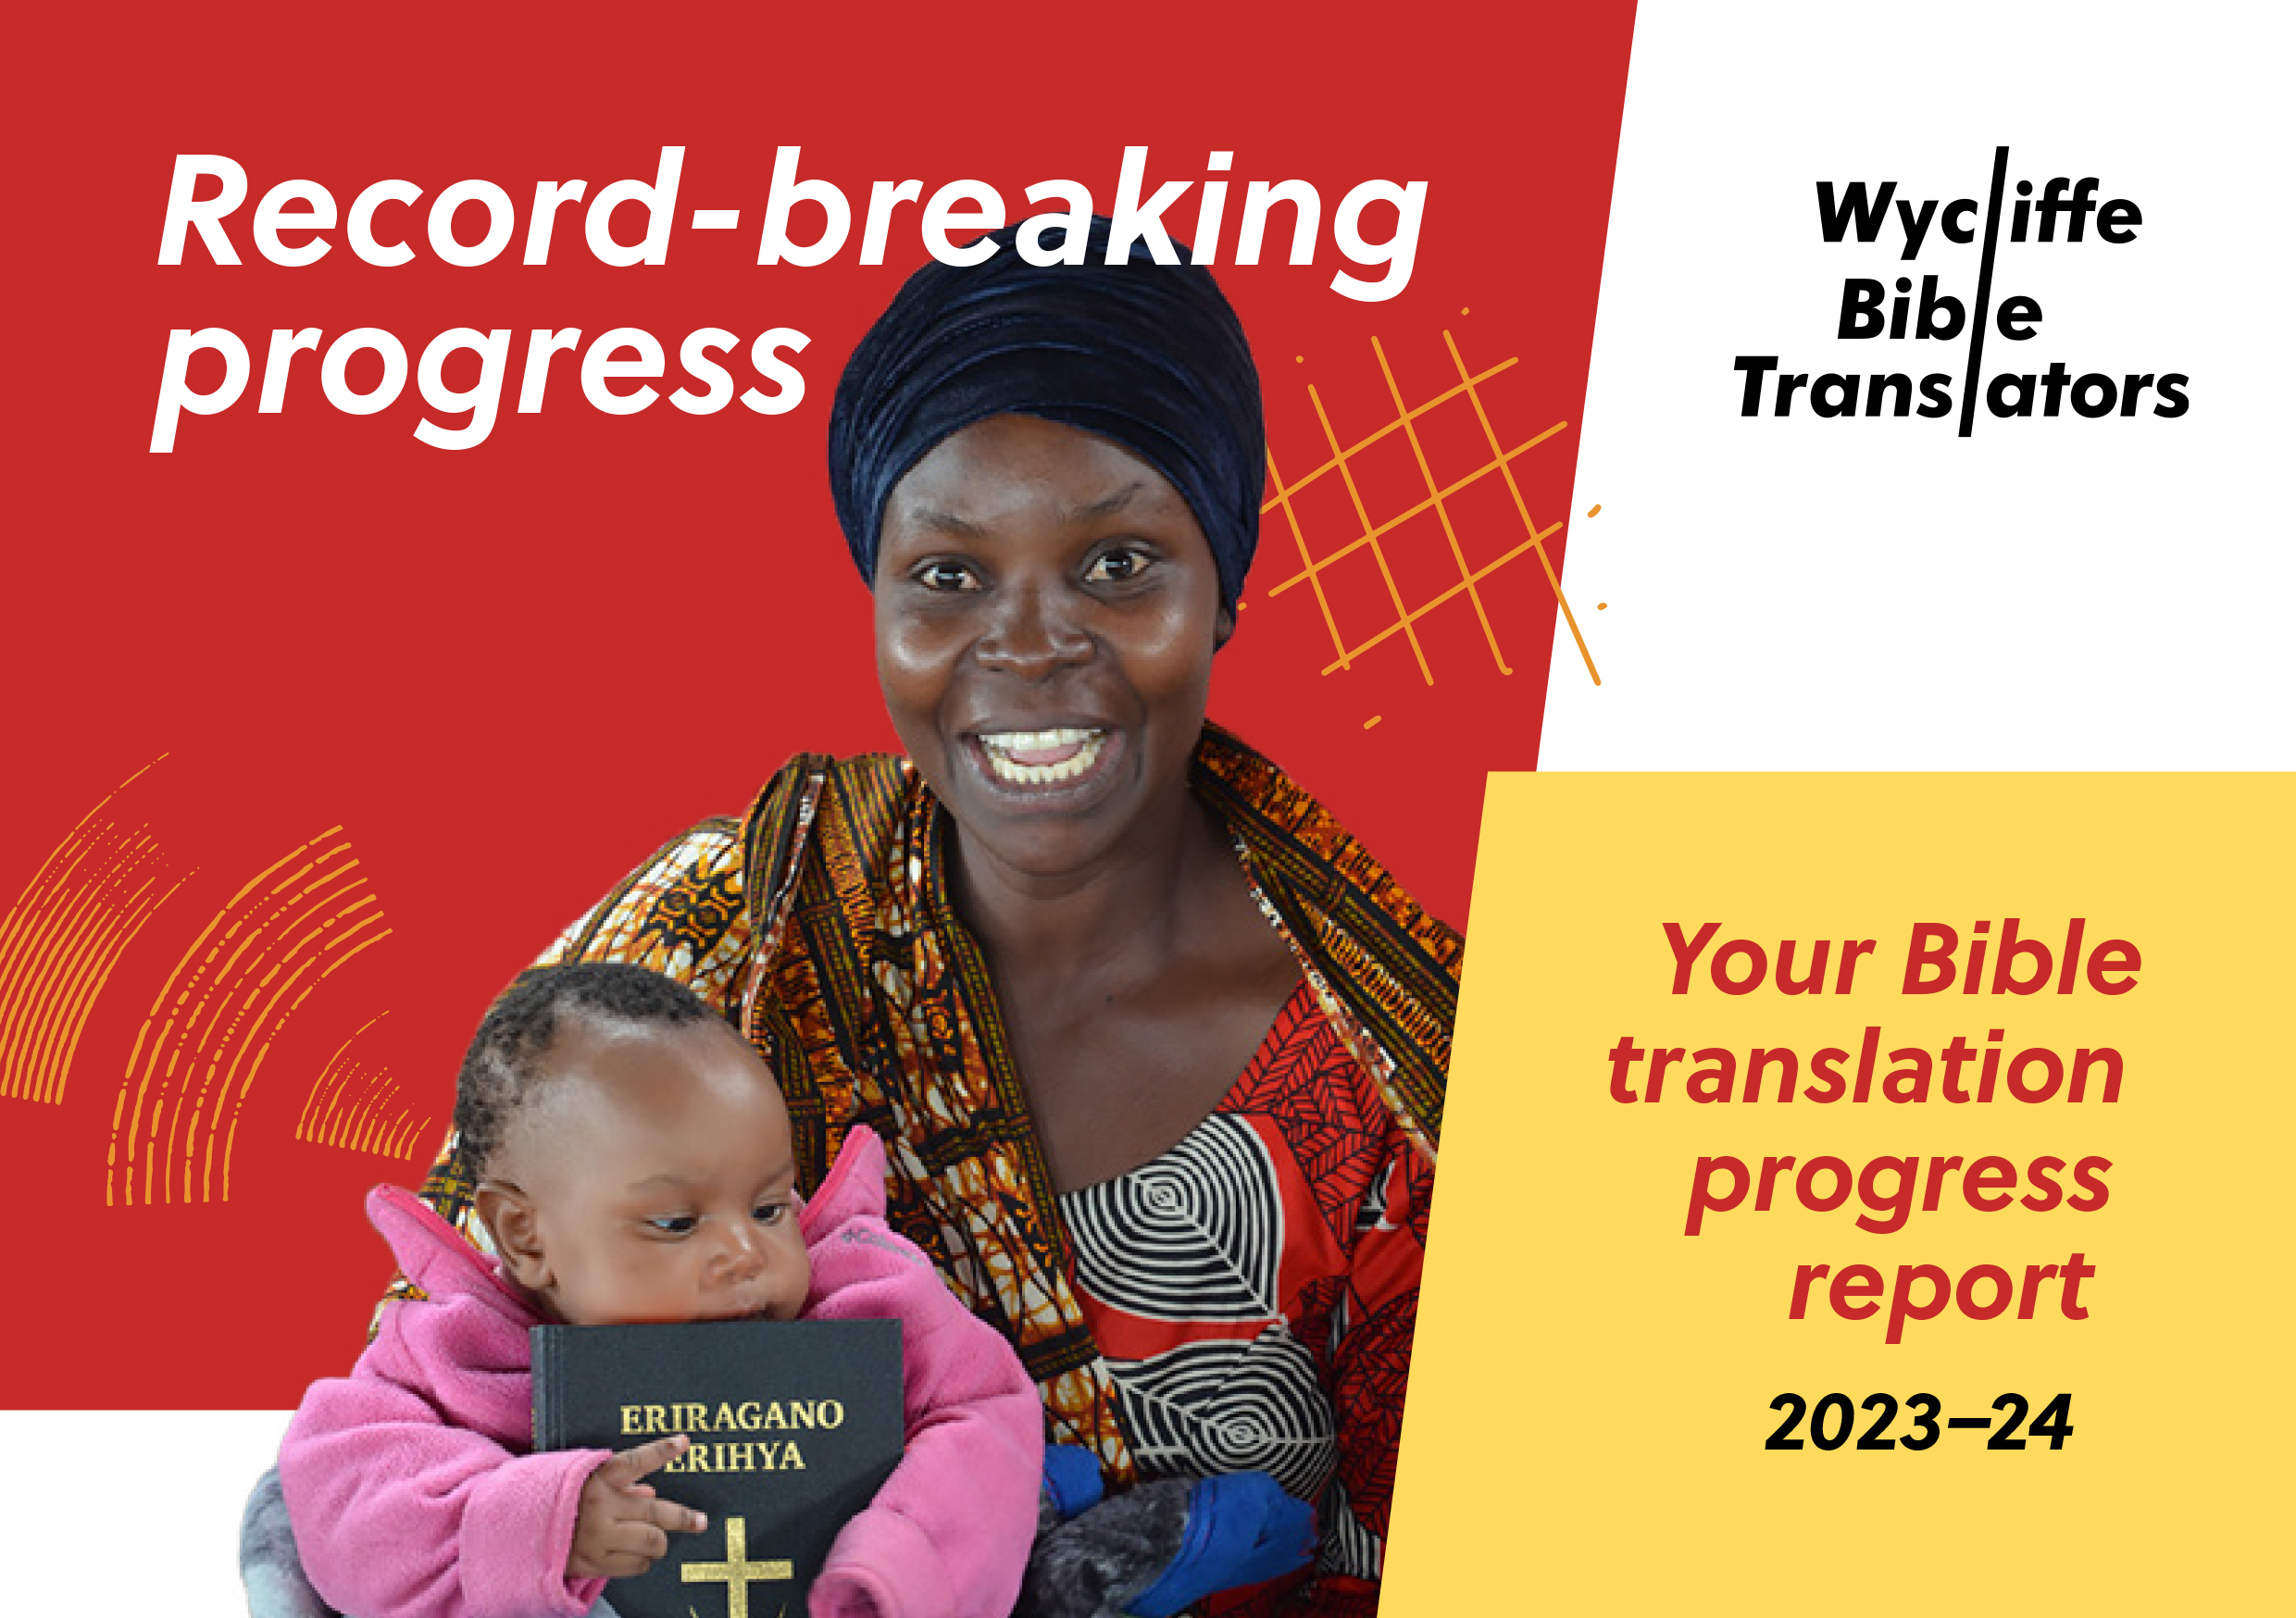 Image of the front cover of the Wycliffe Annual Progress Report 2023-24